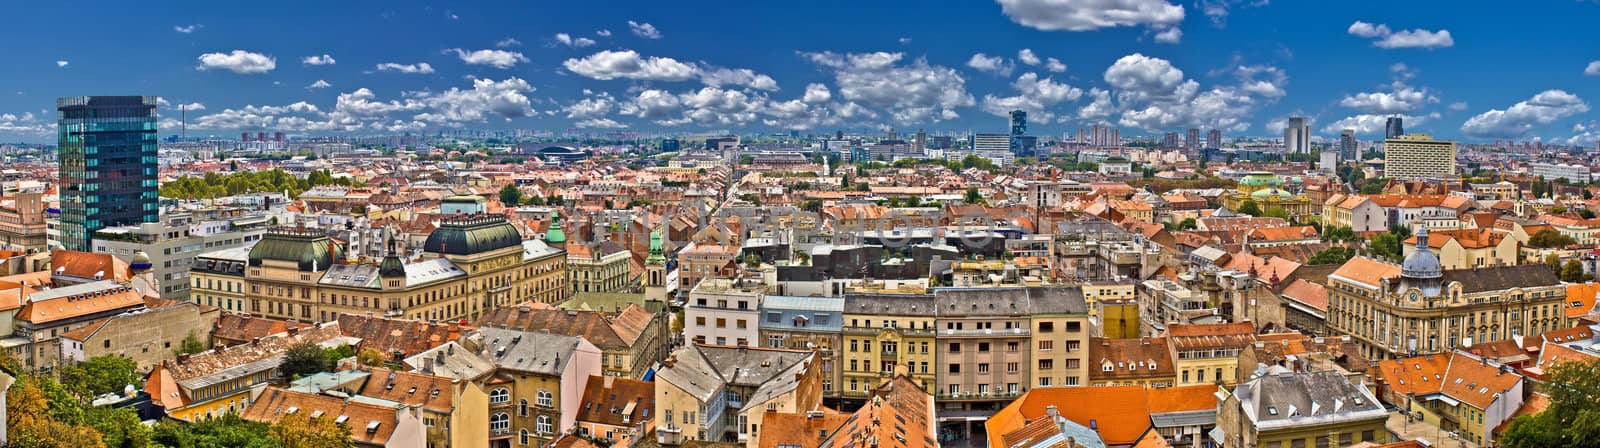 Zagreb lower town colorful panoramic view by xbrchx